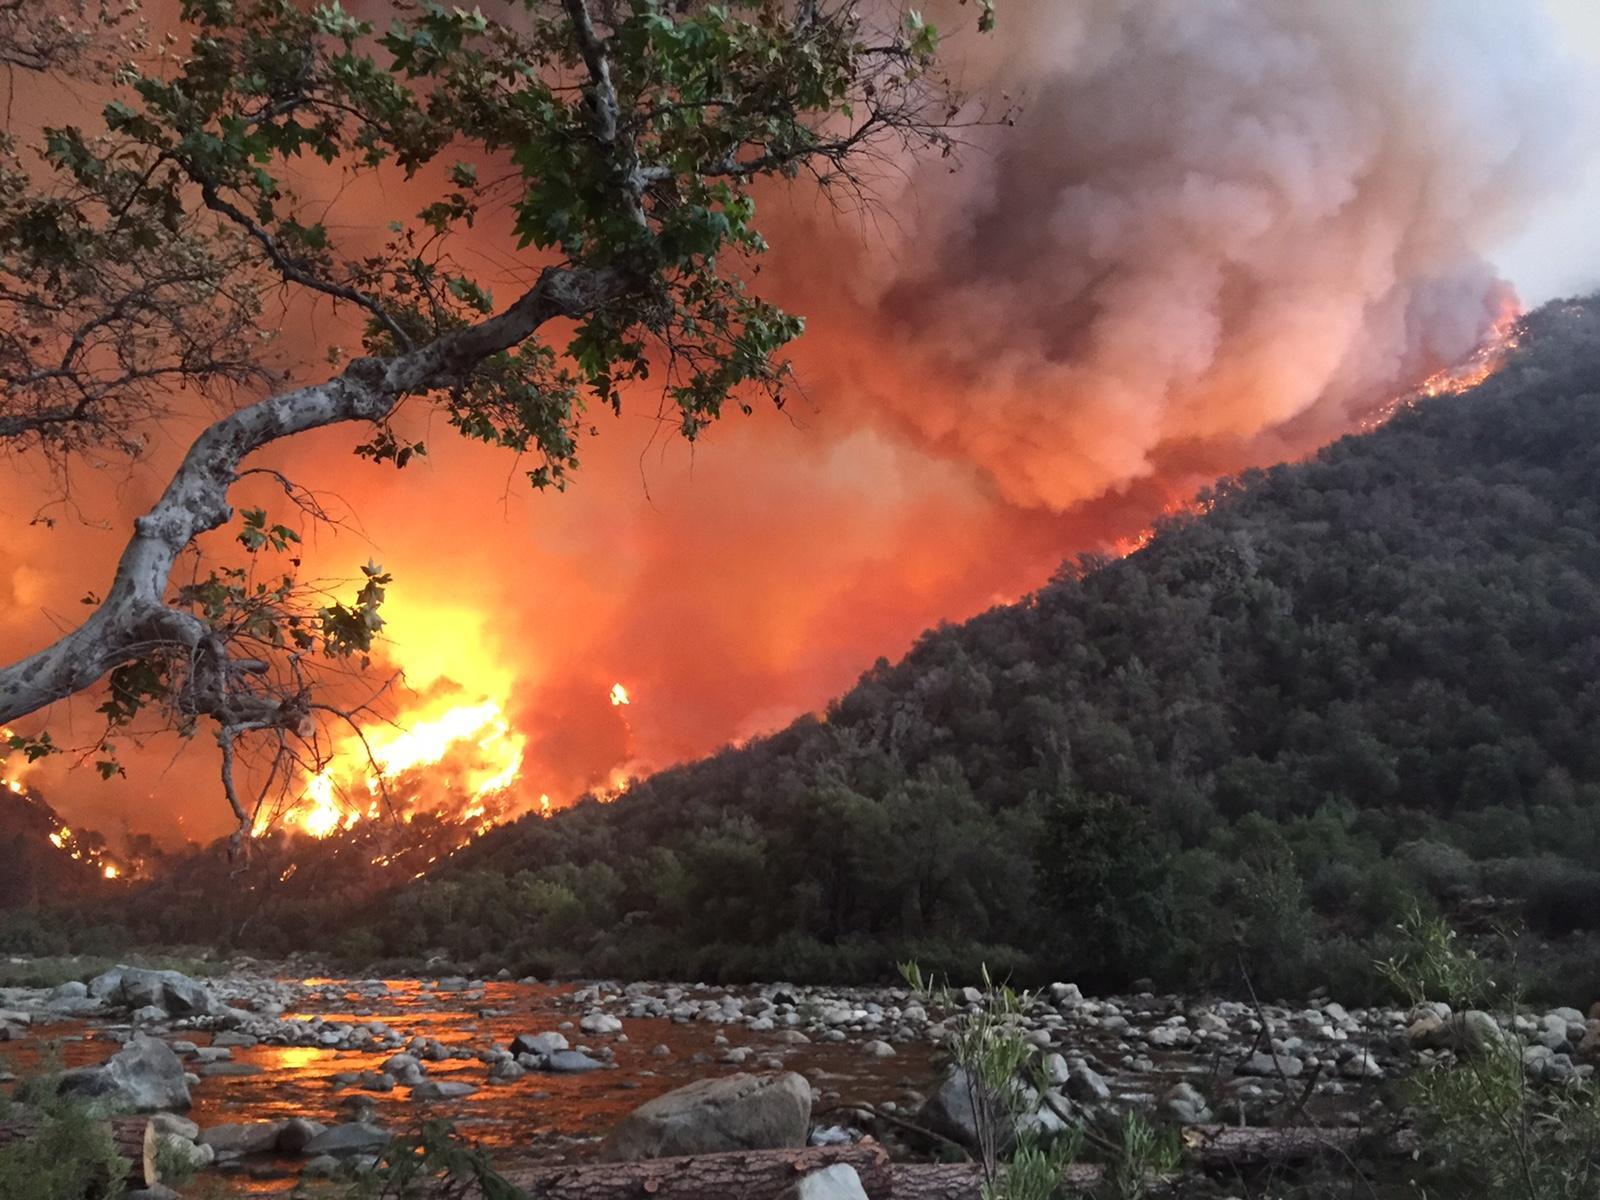 Rough Fire in California - Obadiah's Wildfire Fighters